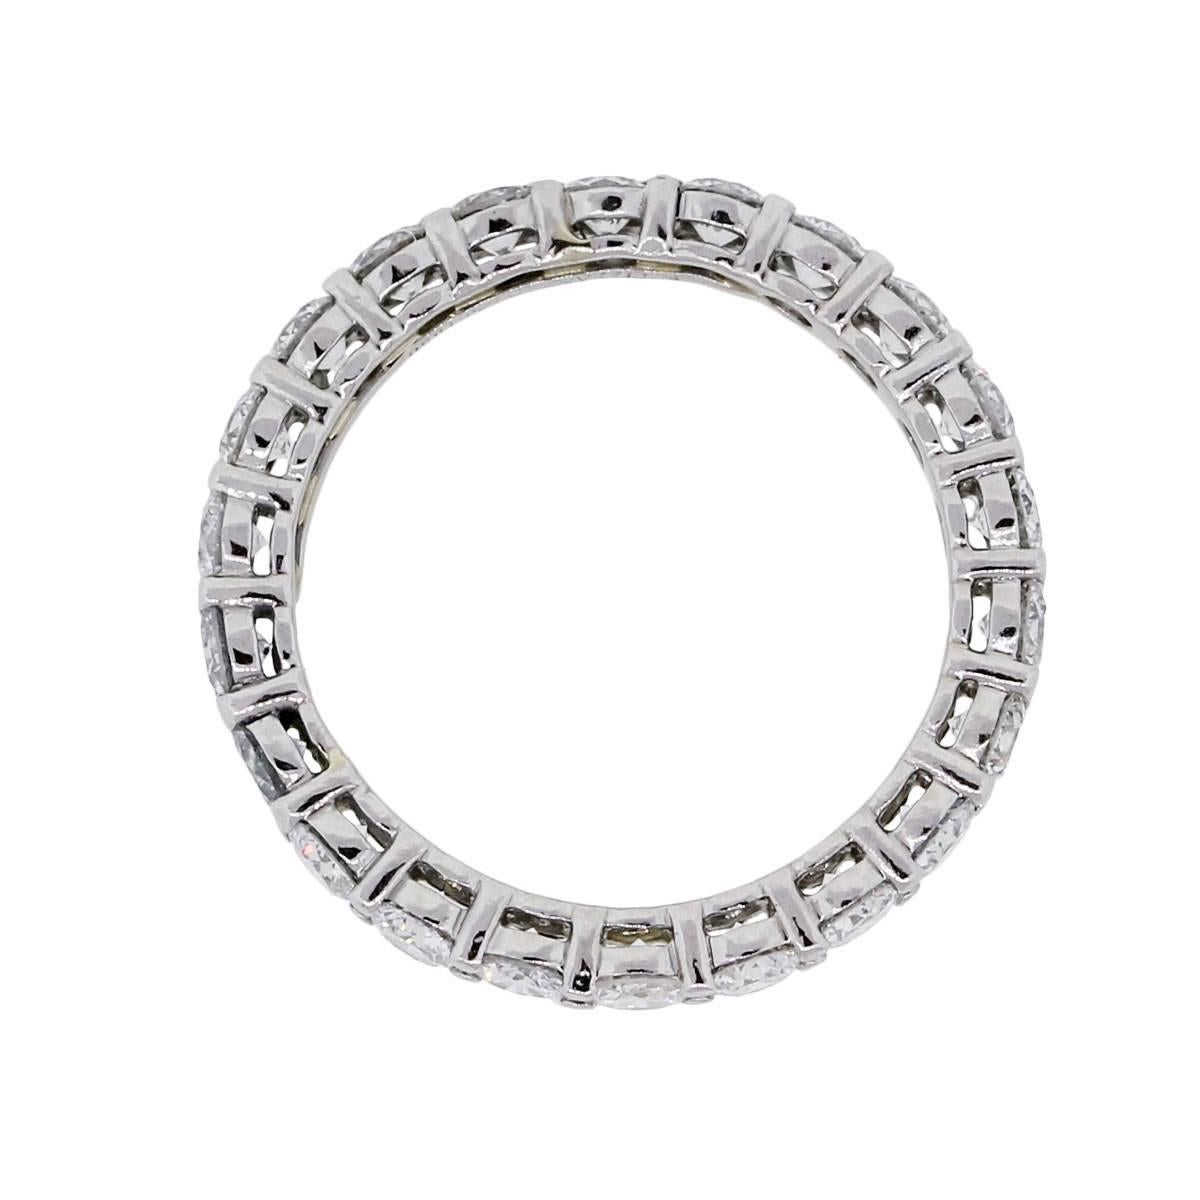 Material: Platinum
Diamond Details: Approximately 2.2ctw of round brilliant diamonds. Diamonds are G/H in color and SI in clarity
Ring Size: 5.75
Ring Measurements: 0.87″ x 0.11″ x 0.87″
Total Weight: 3.2g (2dwt)
SKU: G7023